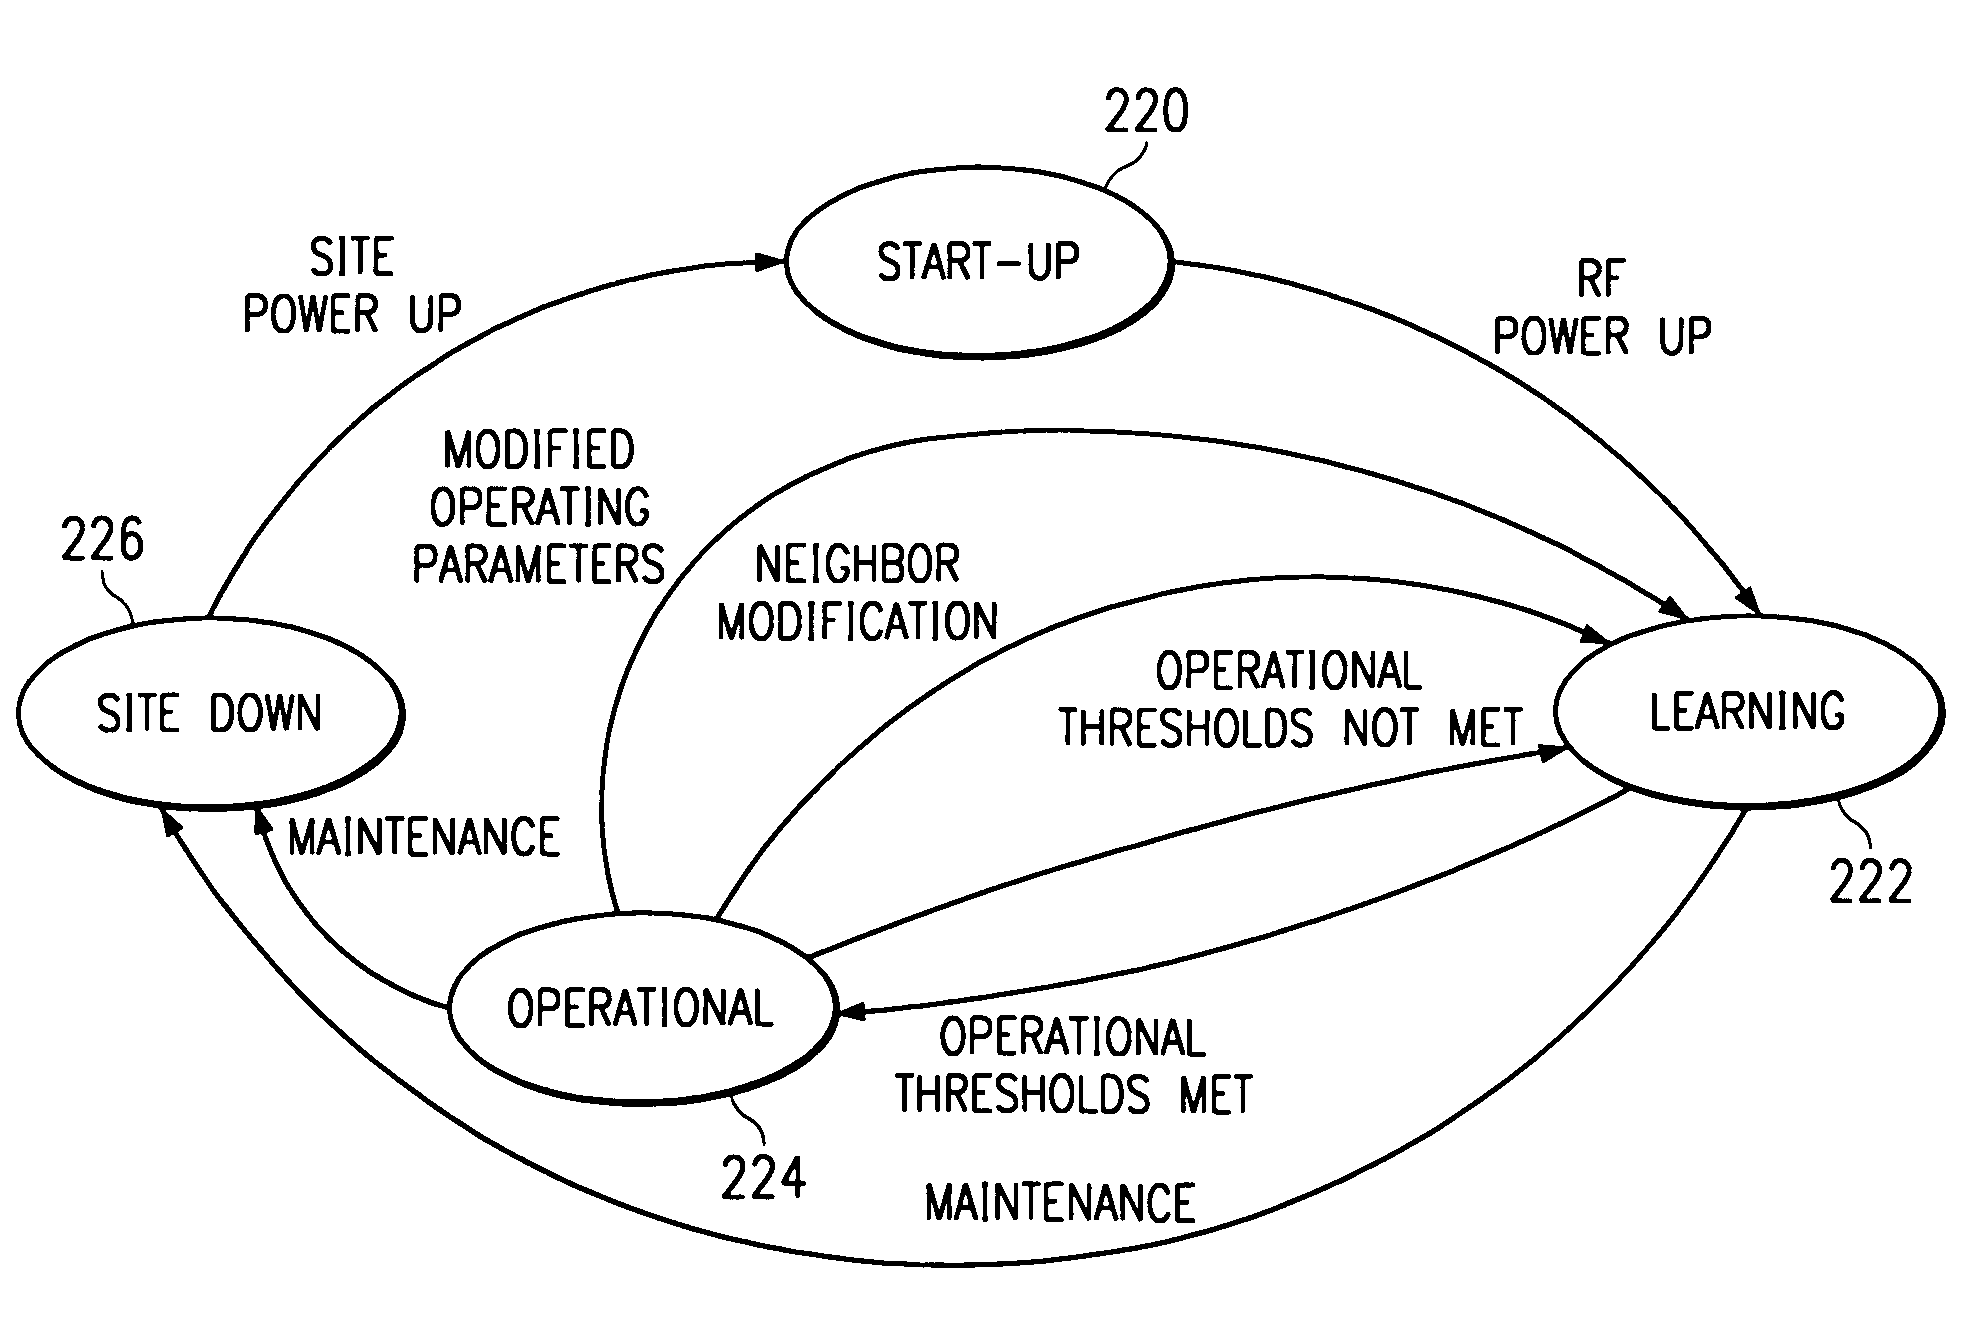 Method and system for configuring wireless routers and networks